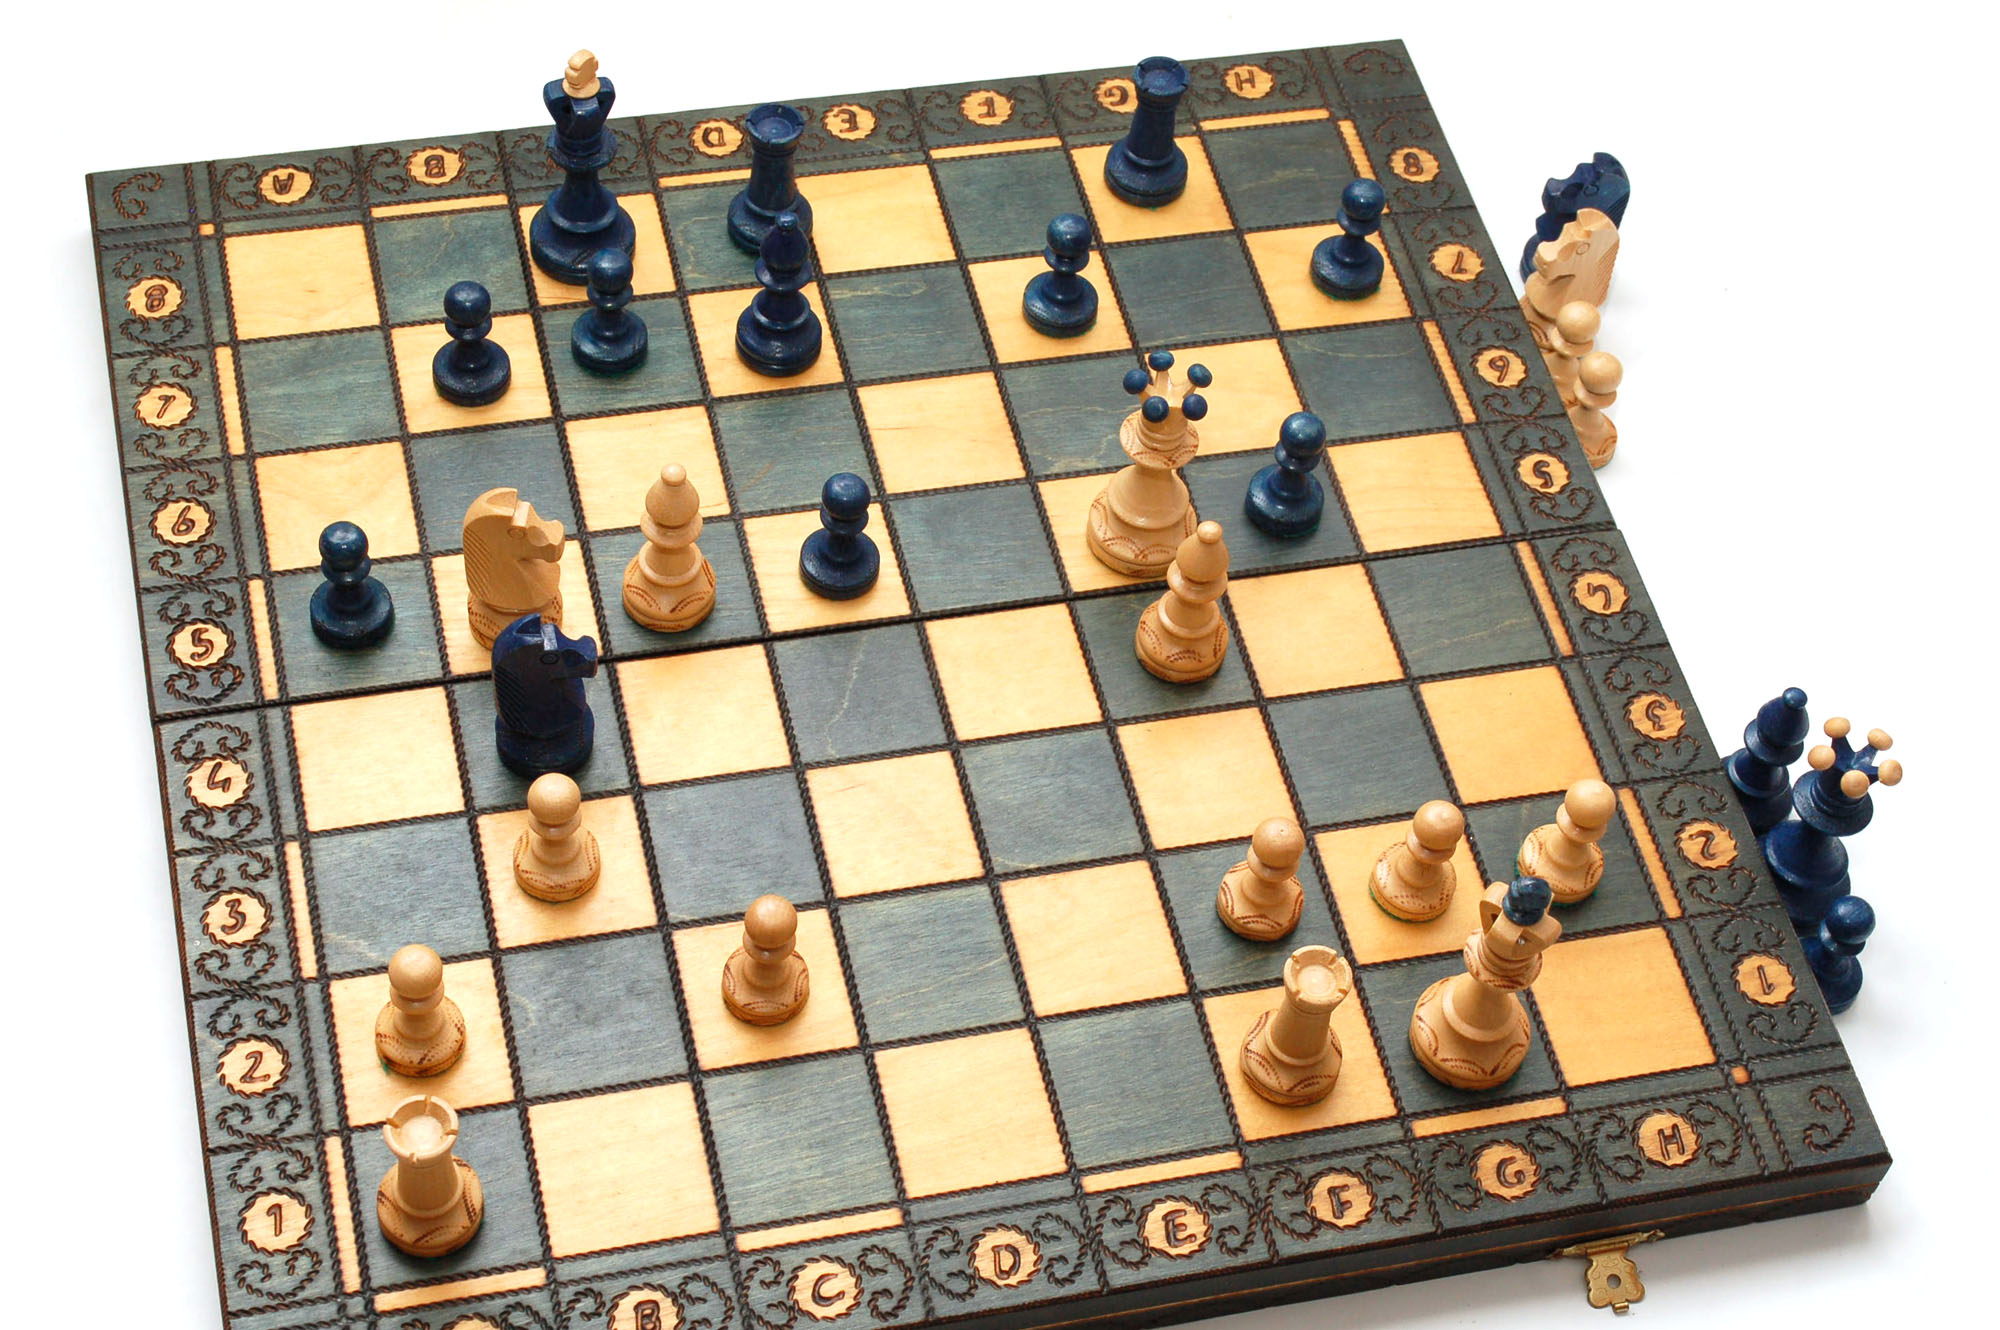 How to Improve the Position of Your Pieces in a Chess Game